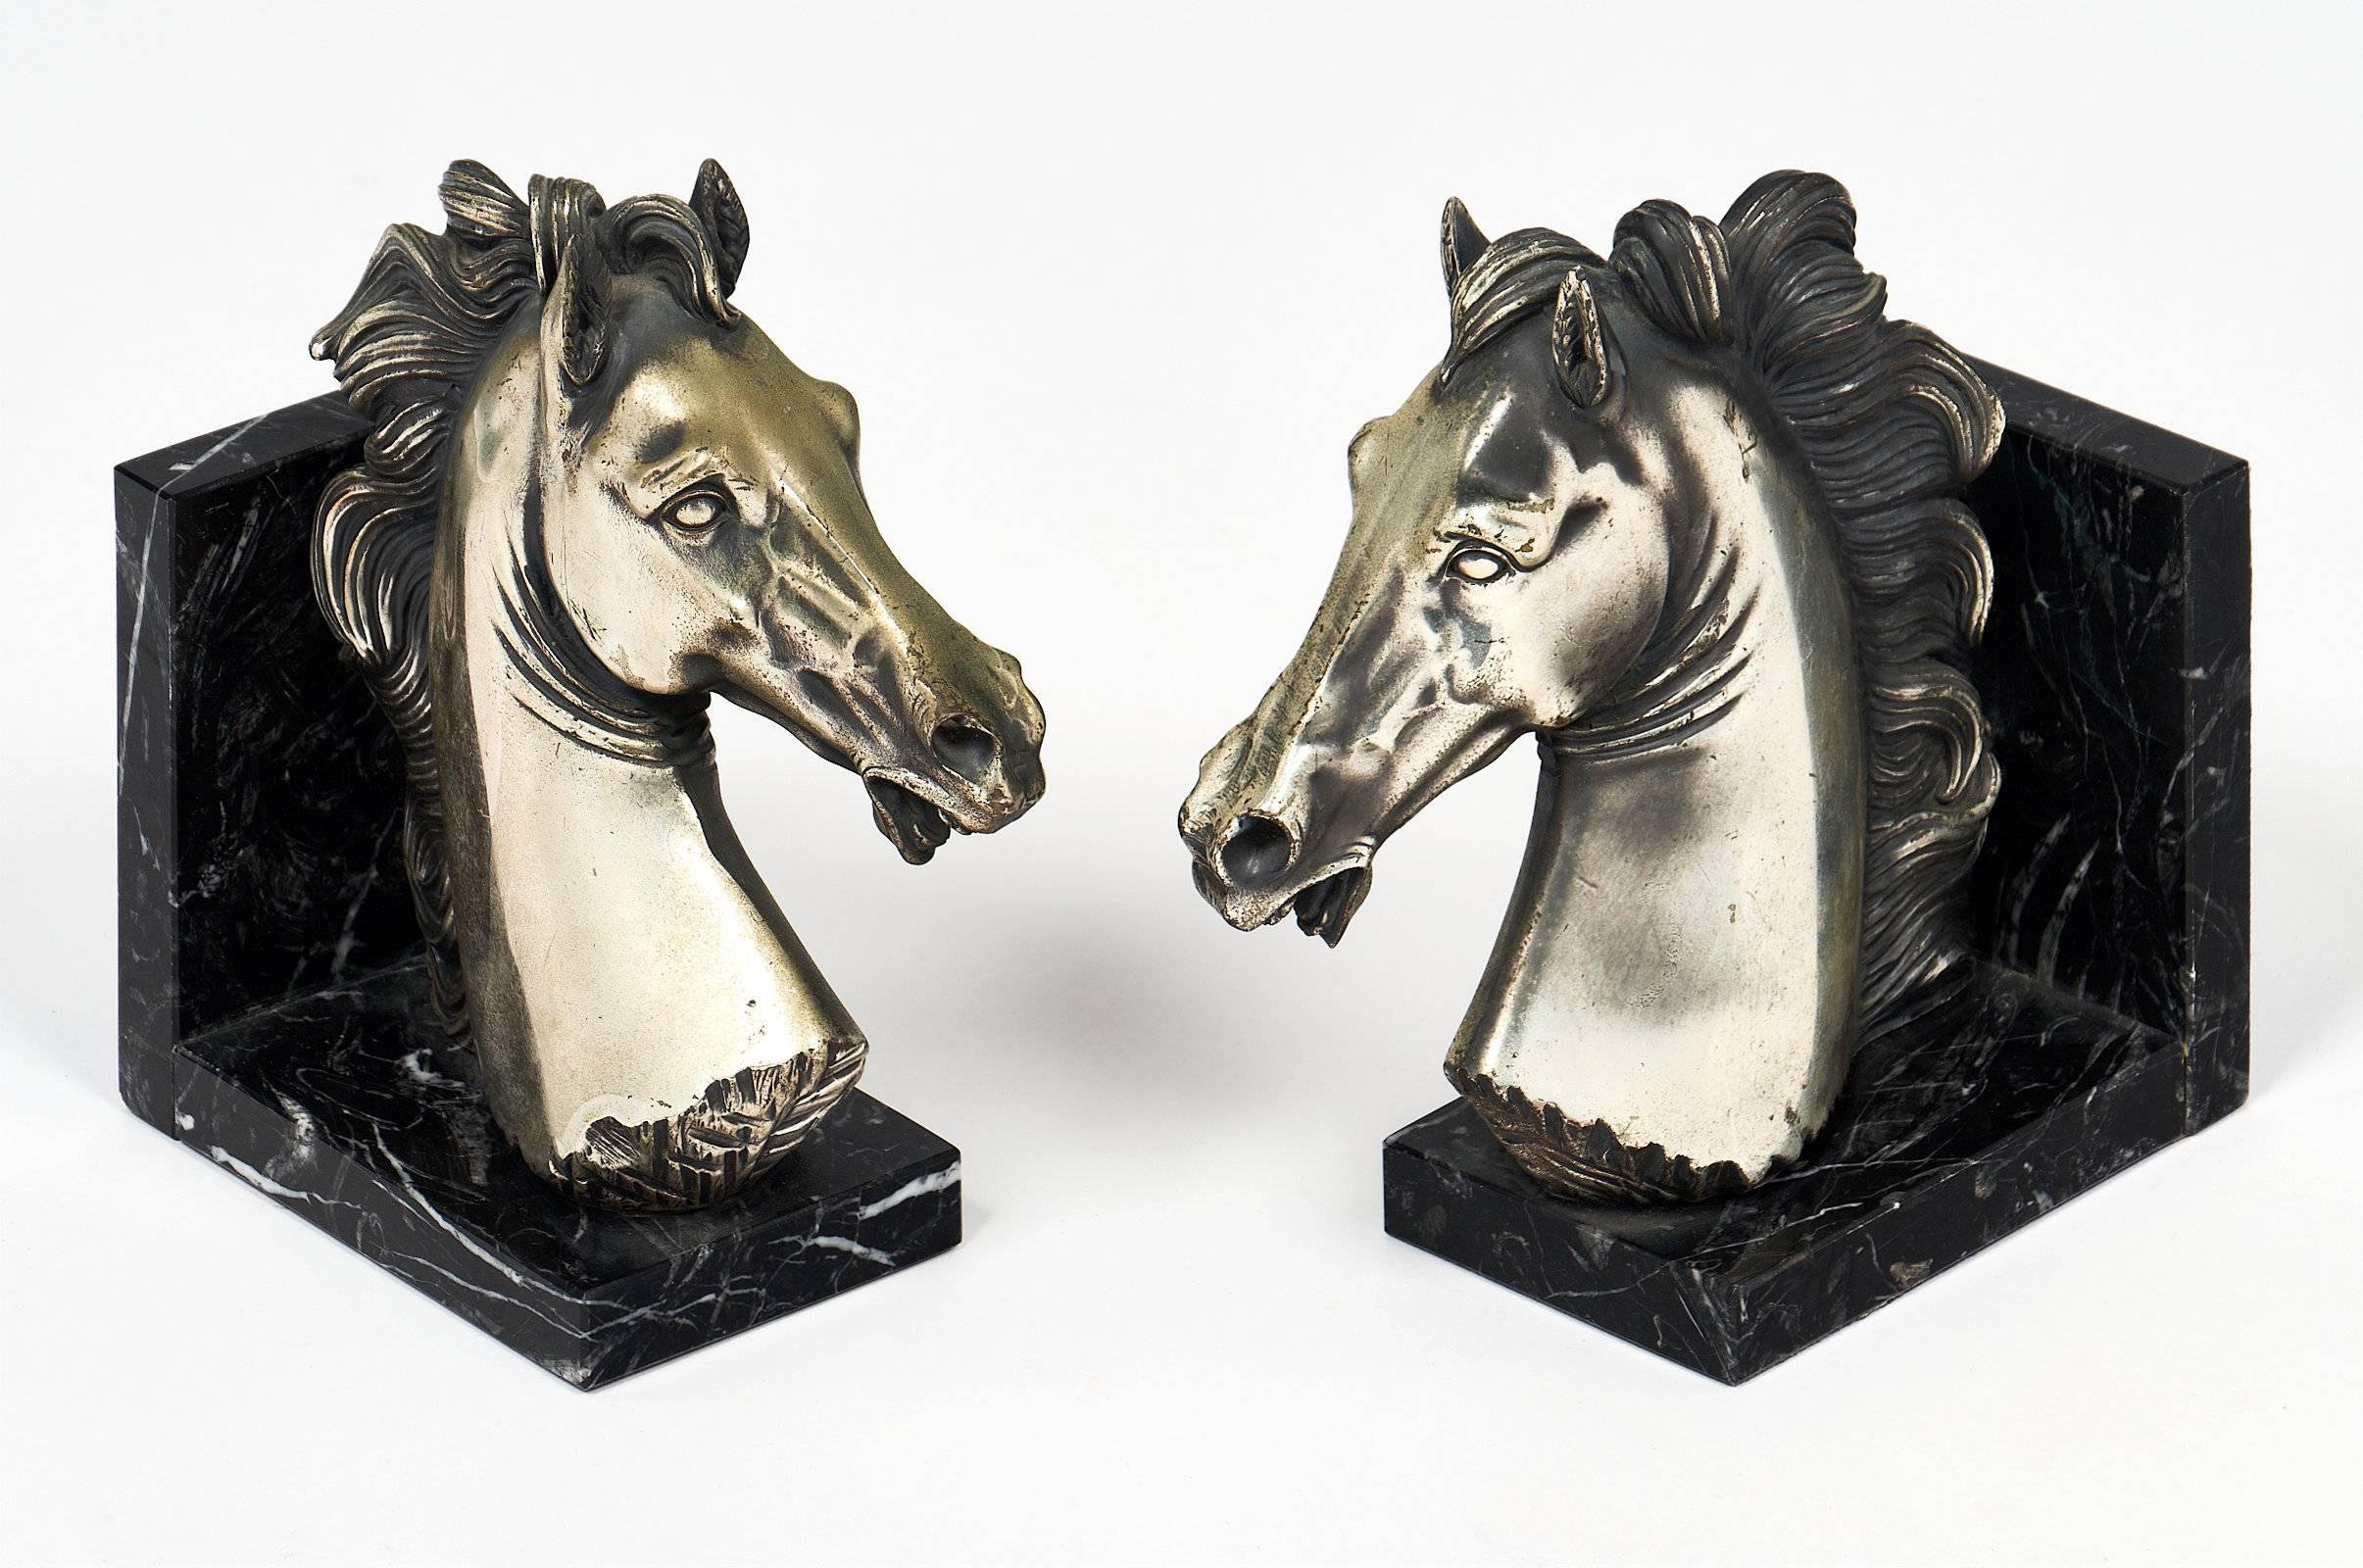 A pair of finely cast pewter Italian horse head bookends mounted on Portor marble bases. The styling of the book ends are highly reminiscent of the Leonardo da Vinci Italian Renaissance horse head.